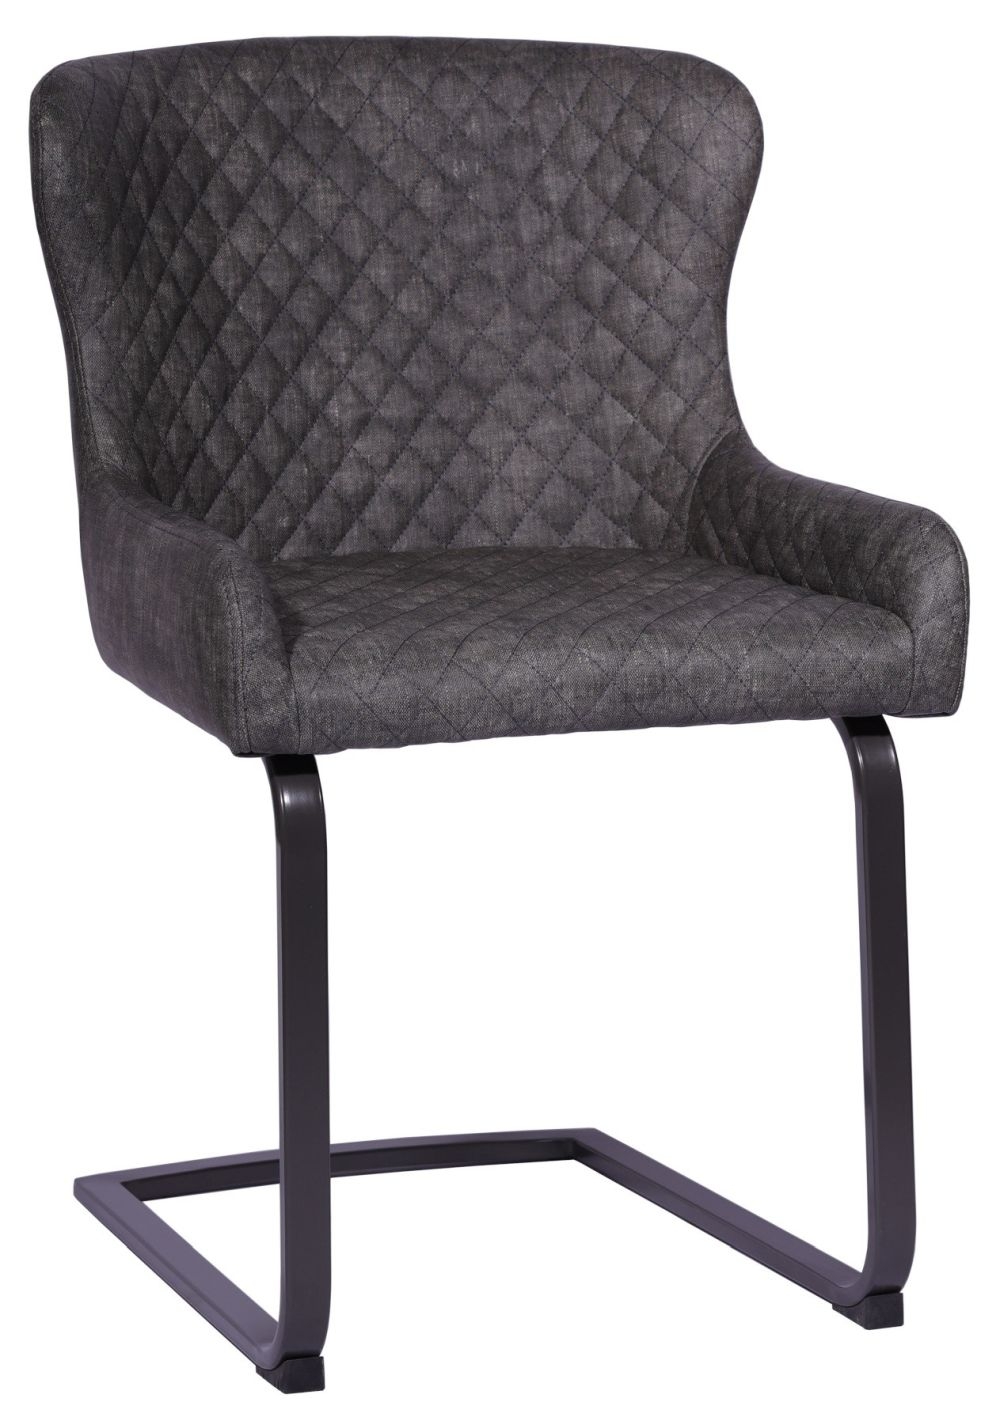 Fusion Drak Grey Cantilever Fabric Dining Chair Sold In Pairs